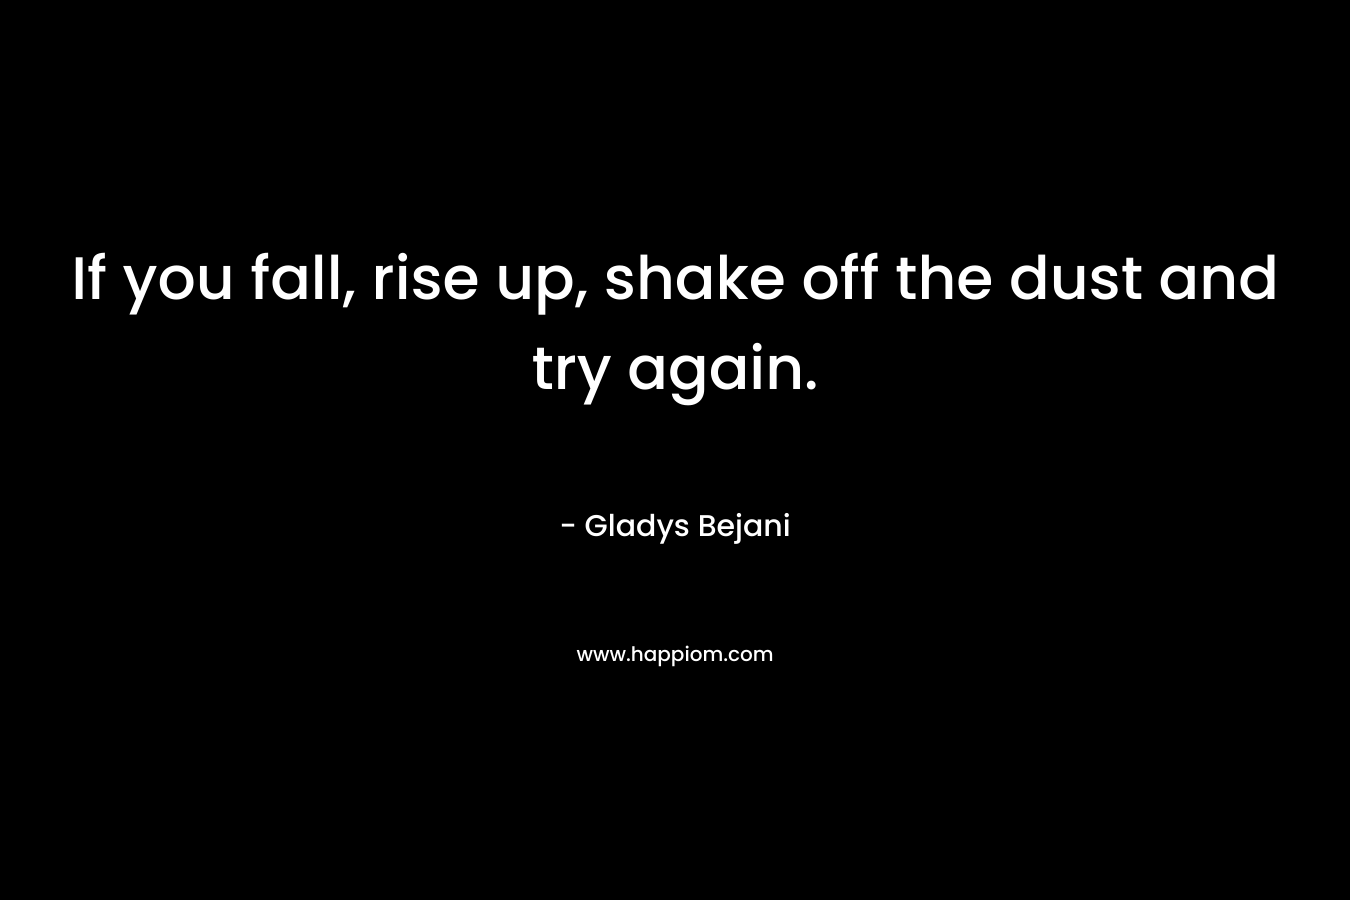 If you fall, rise up, shake off the dust and try again.